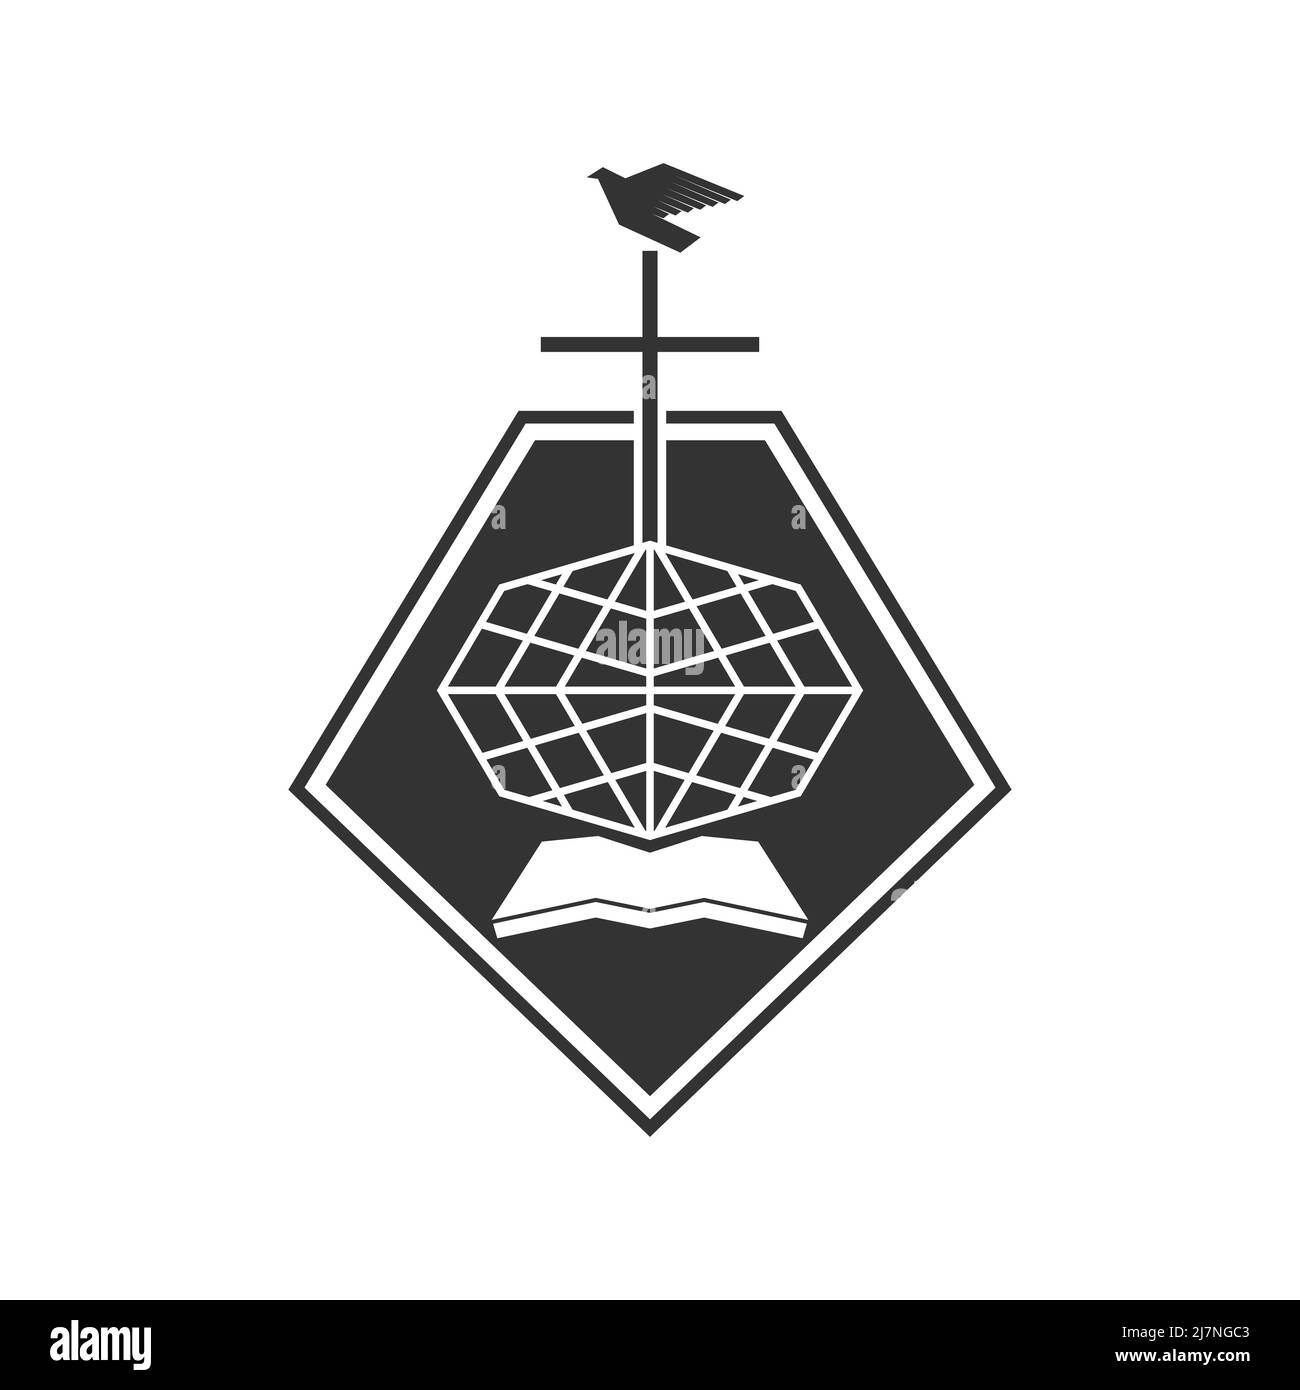 Christian illustration. Church logo. The cross of Jesus against the backdrop of a globe and an open bible, on top of a dove - a symbol of the Spirit. Stock Vector